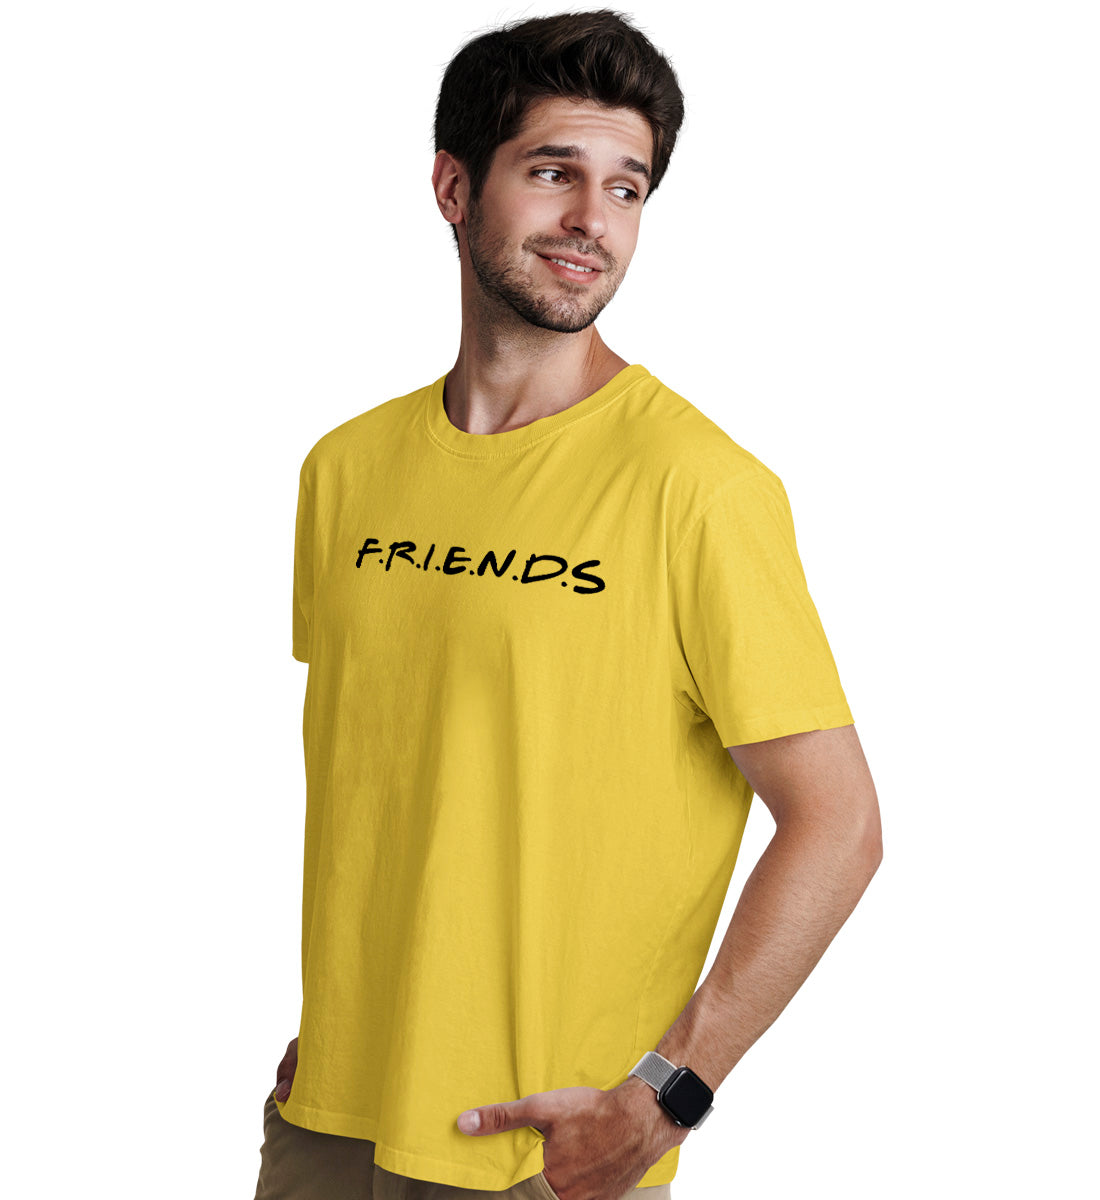 Friends Boys Squad Goals Matching Printed Tshirts (Pack Of 2)